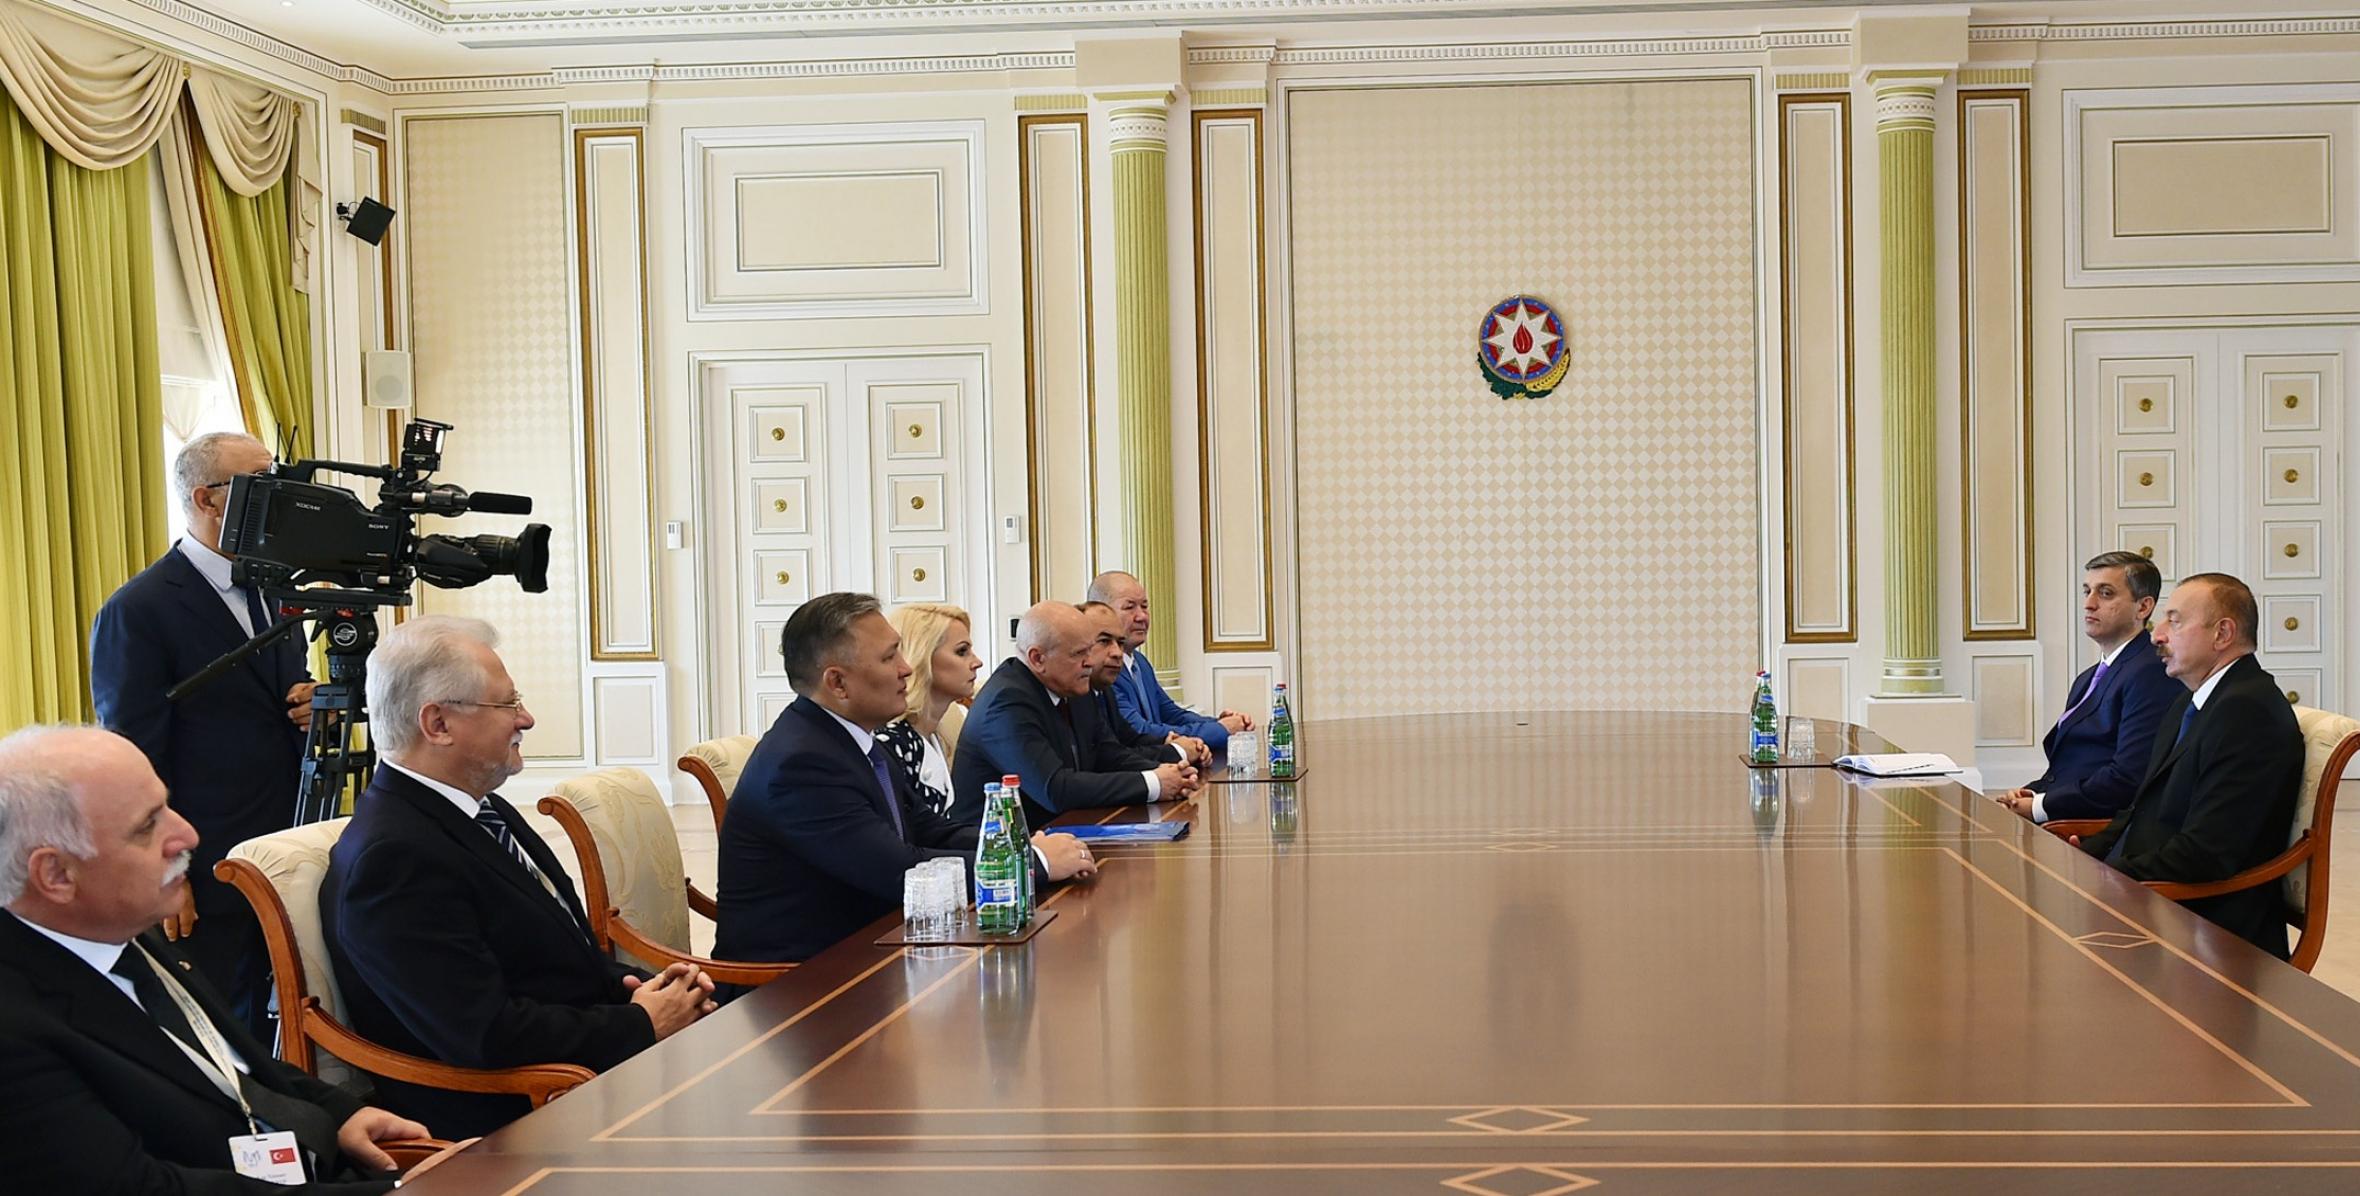 Ilham Aliyev received group of participants of Baku session of CIS Council of Heads of Supreme Audit Institutions